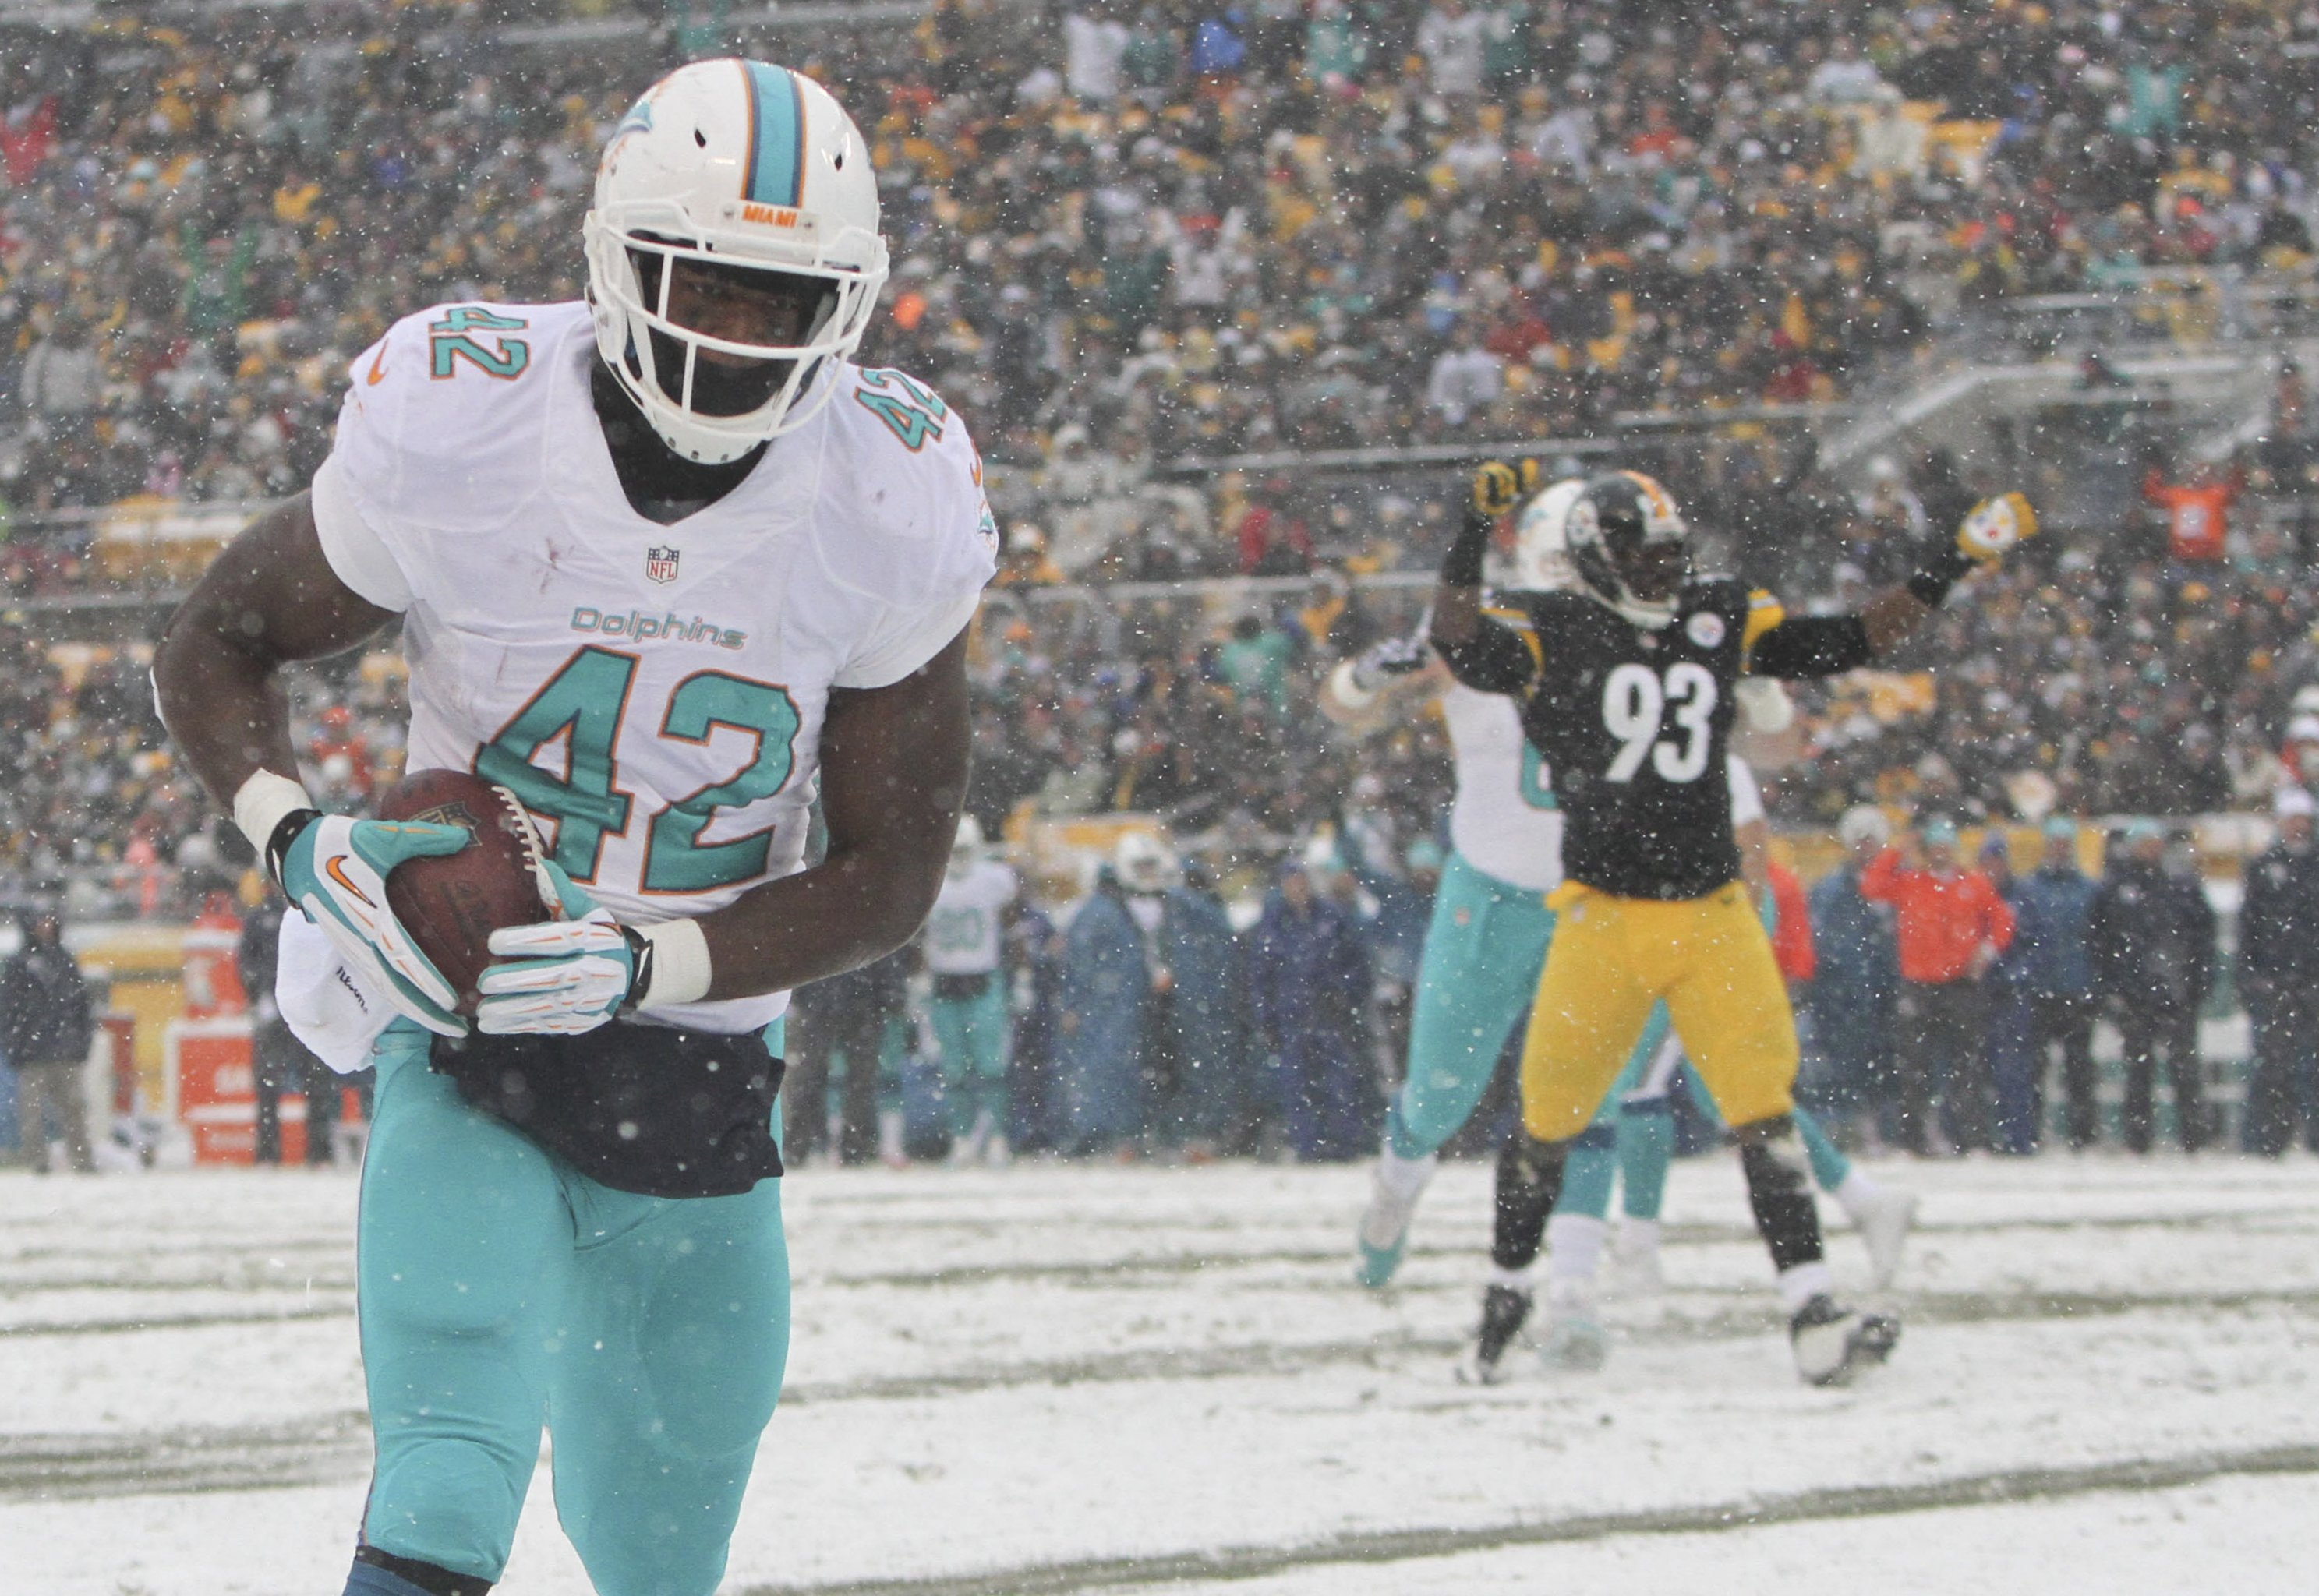 Rain, sleet or snow: How NFL players stay warm during the coldest